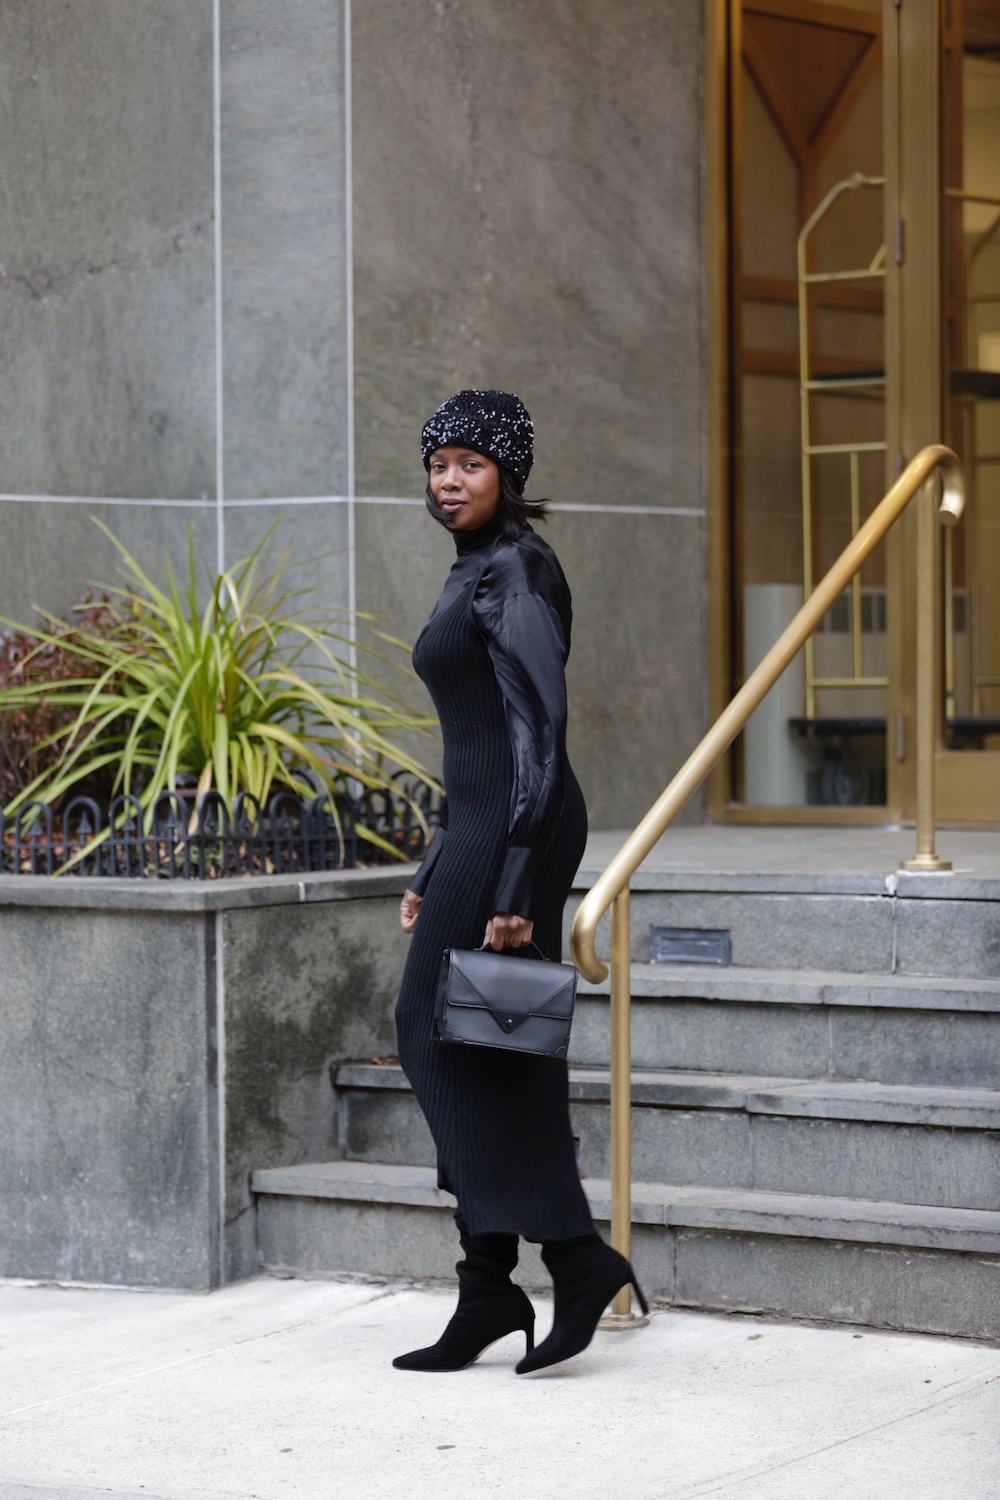 My Fave Looks: All Black Everything | Square Pearls